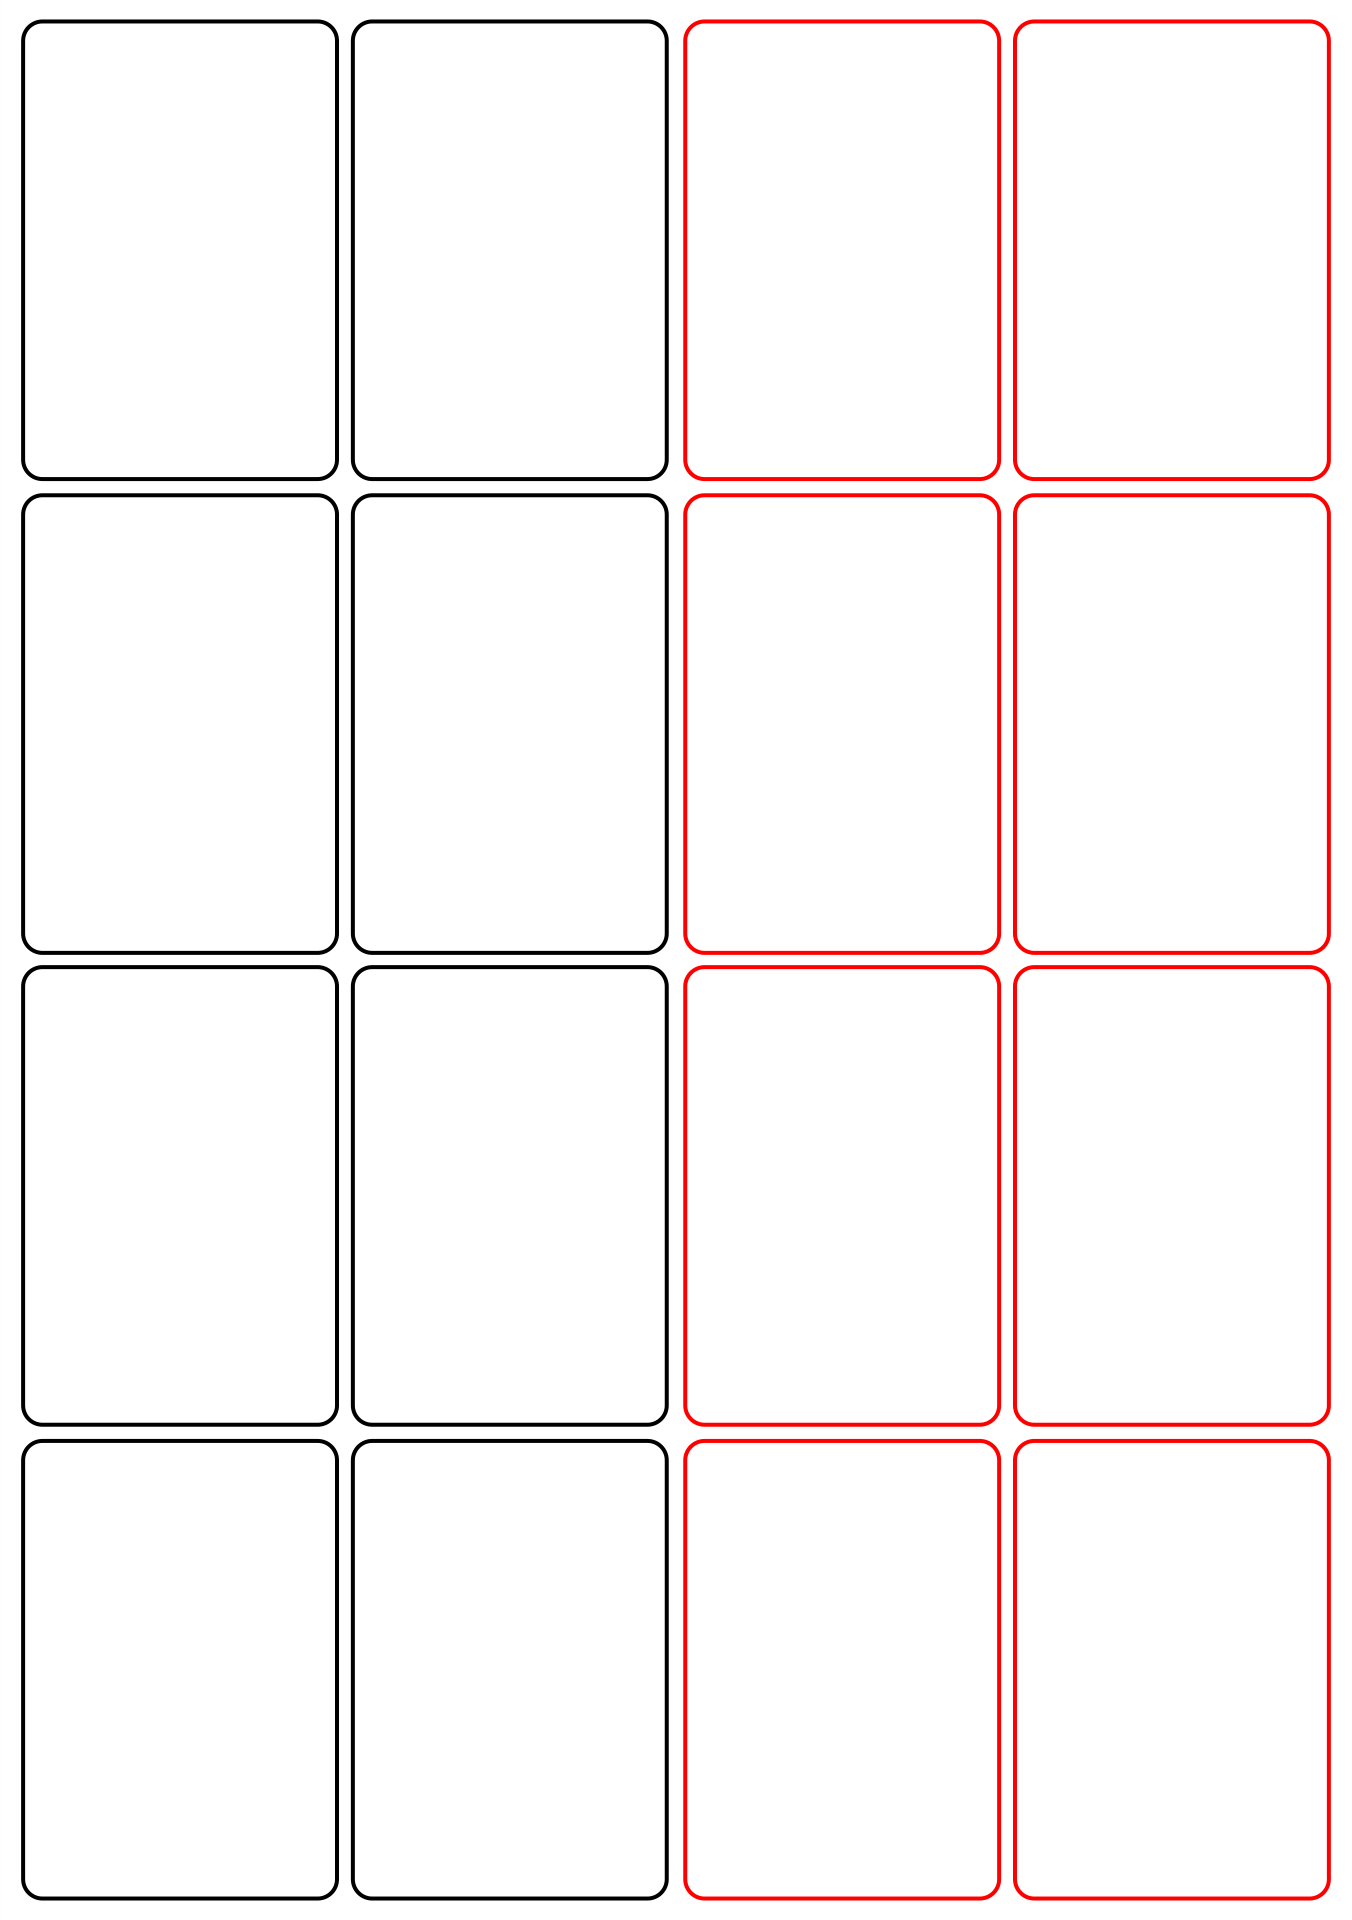 8 Best Images of Blank Playing Card Printable Template For Word - Blank